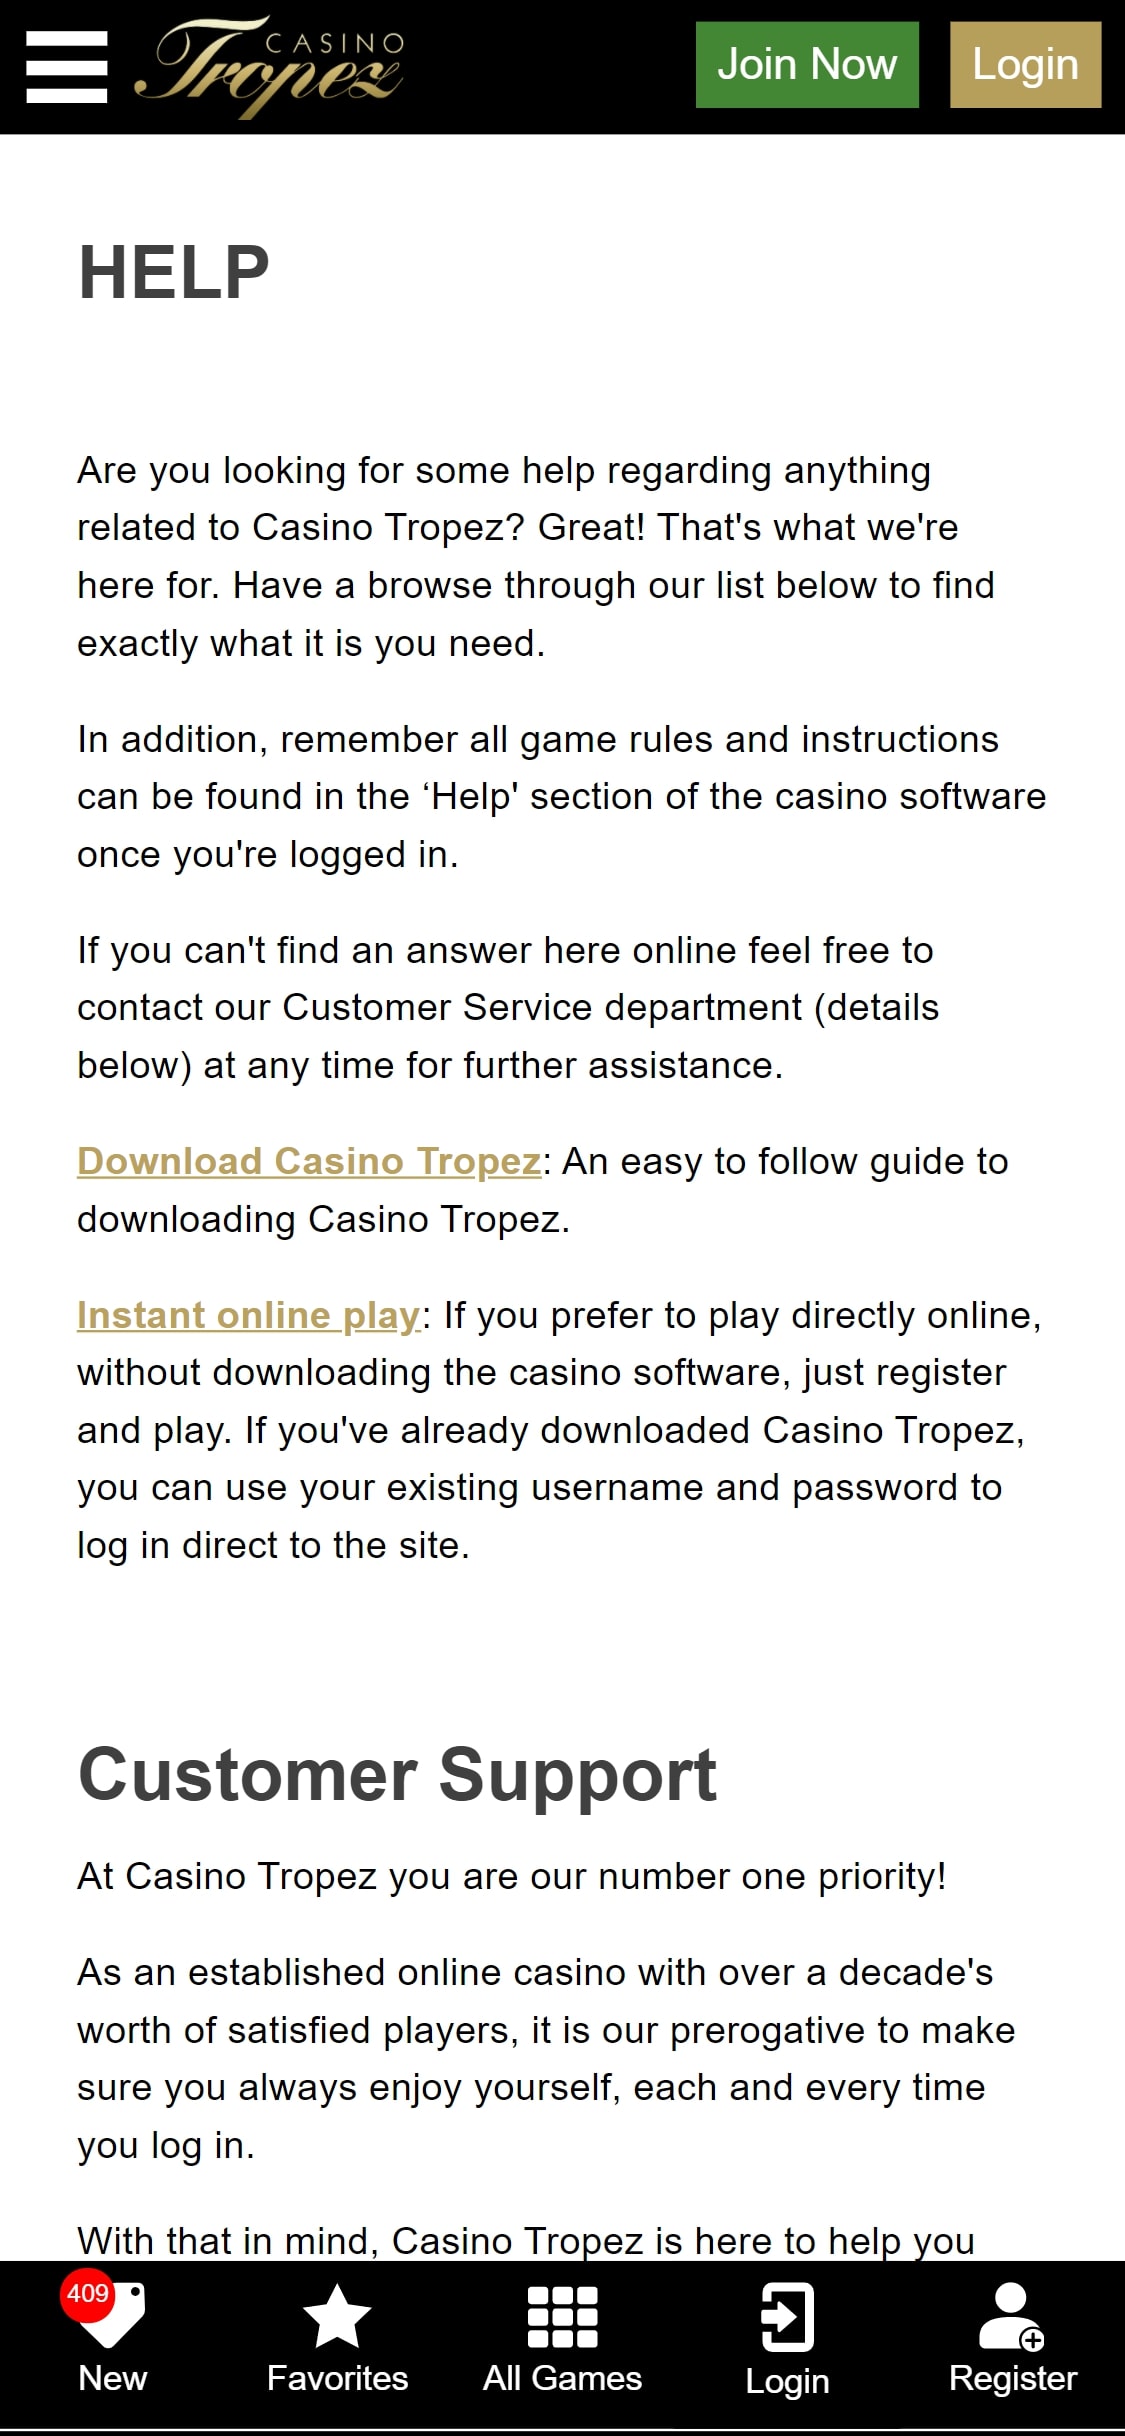 Casino Tropez Mobile Support Review